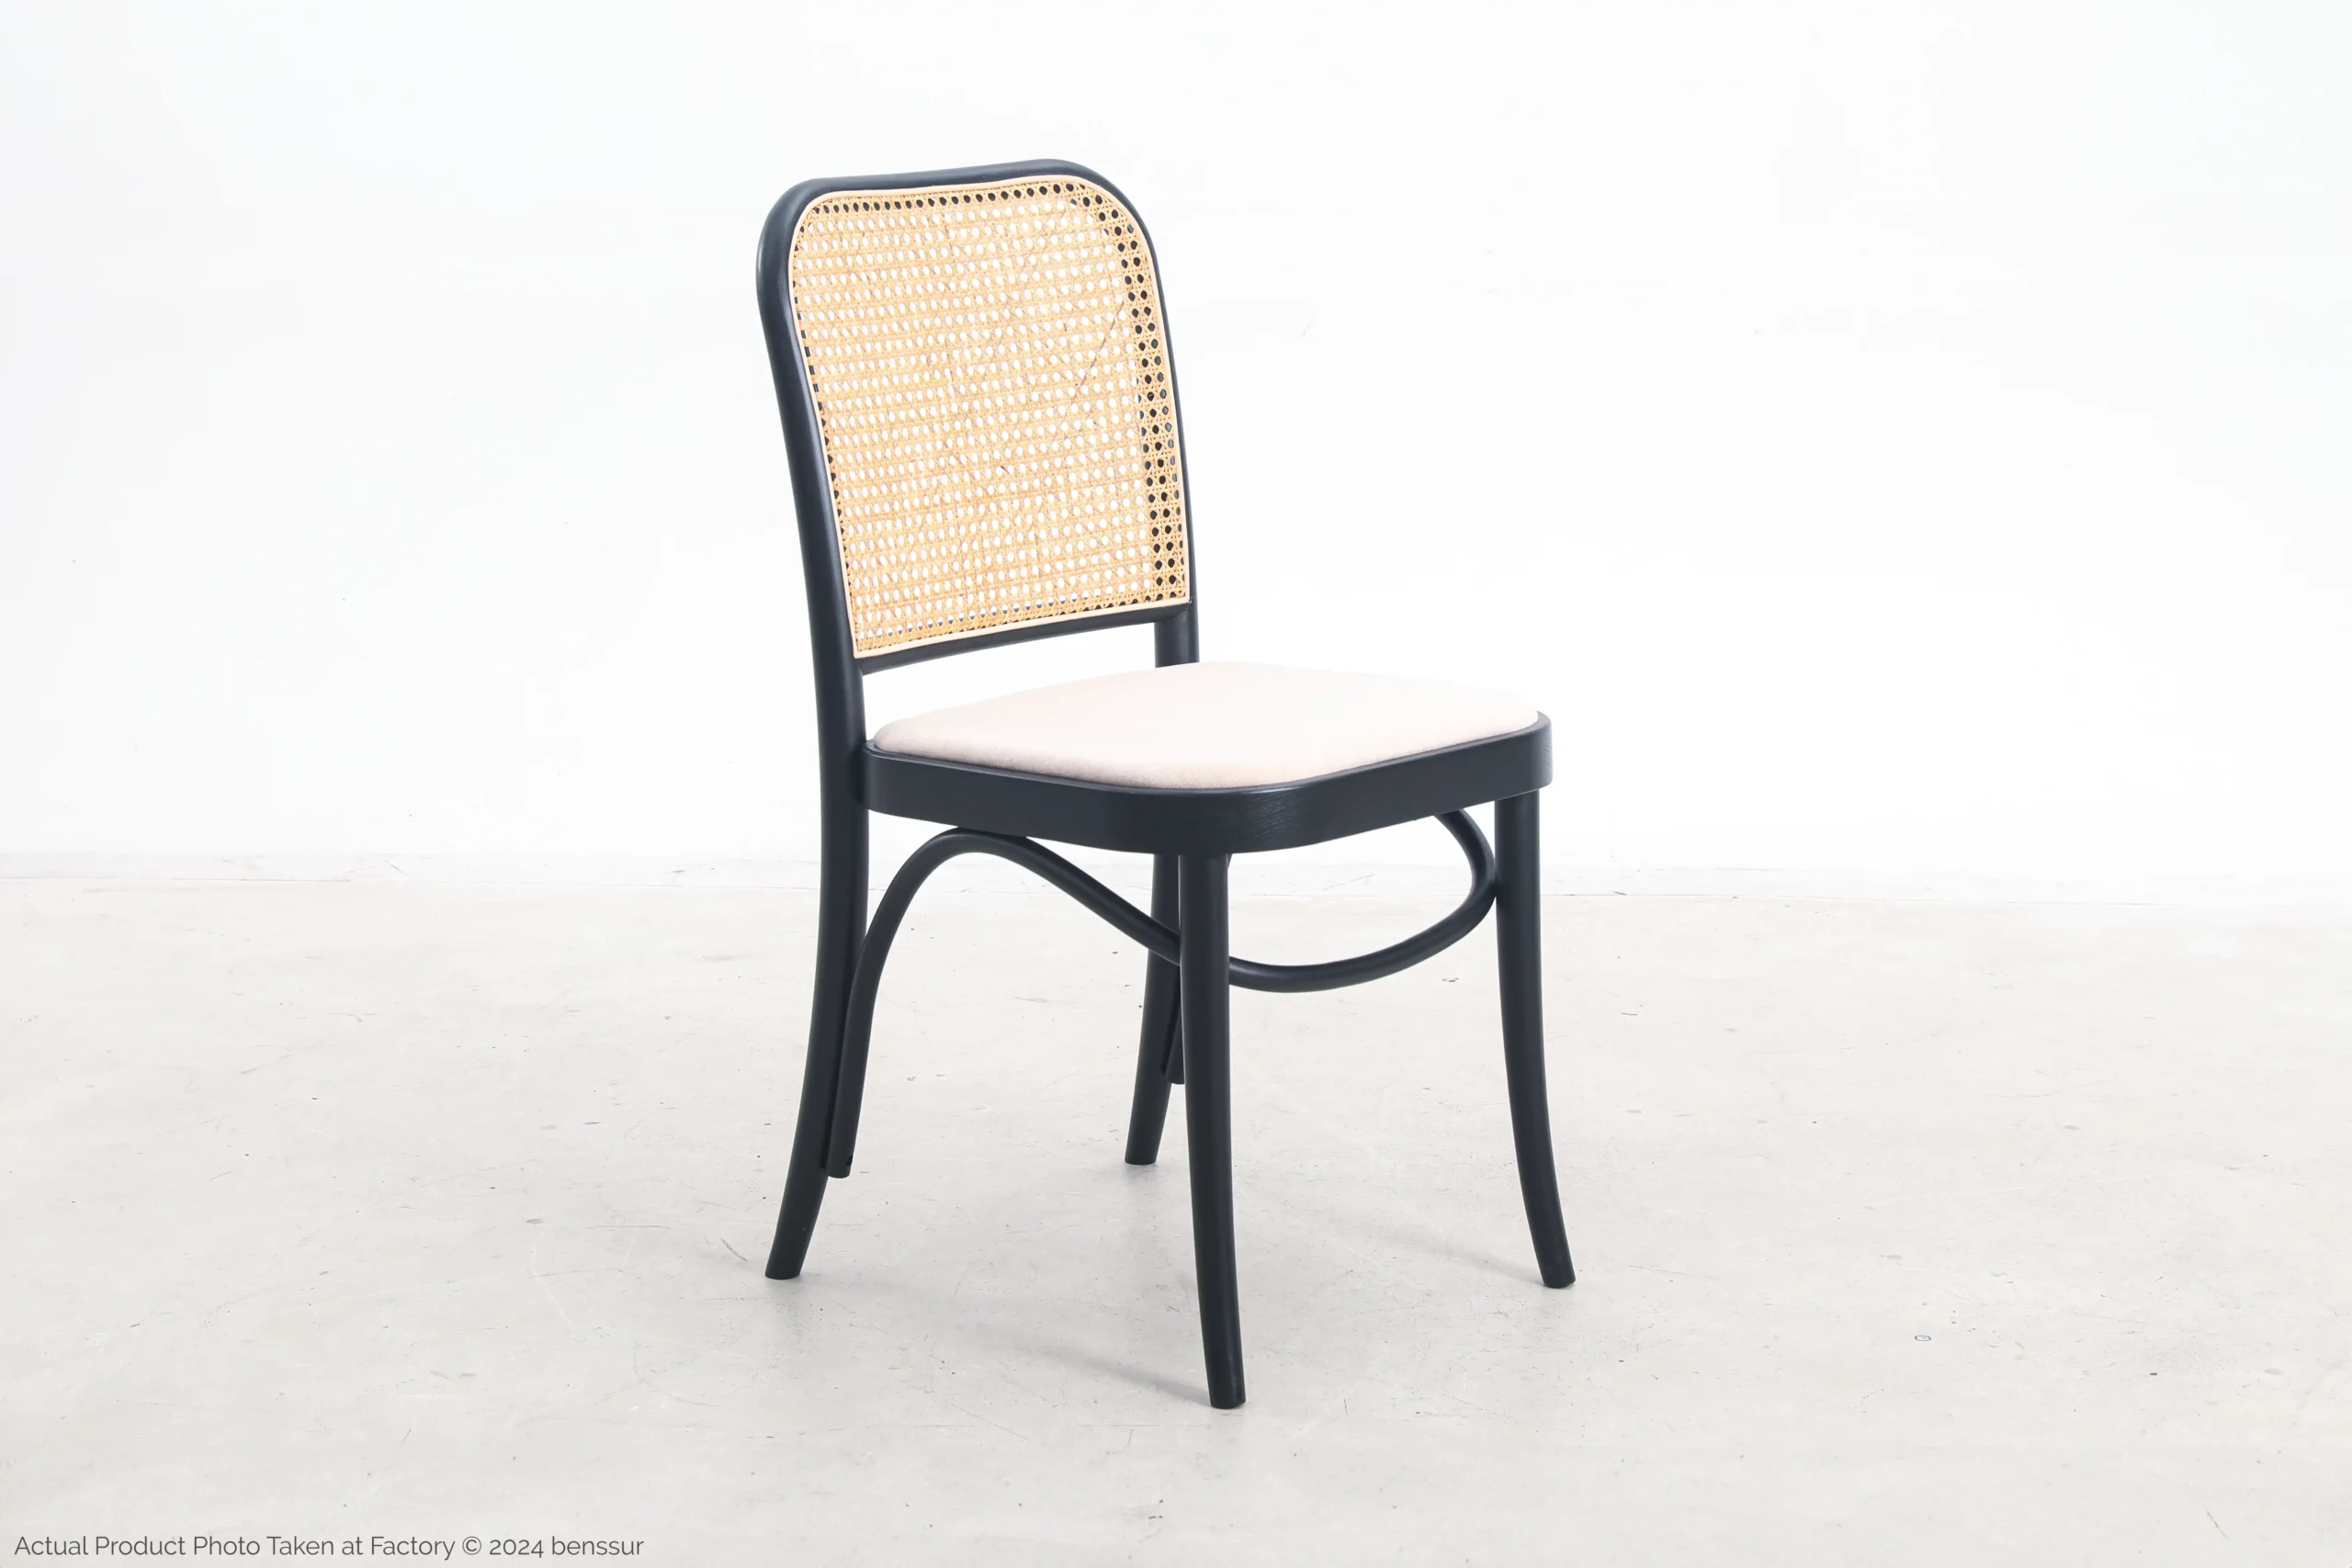 Upholstered No.811 Chair in black ash by Josef Hoffmann, front right facing view.